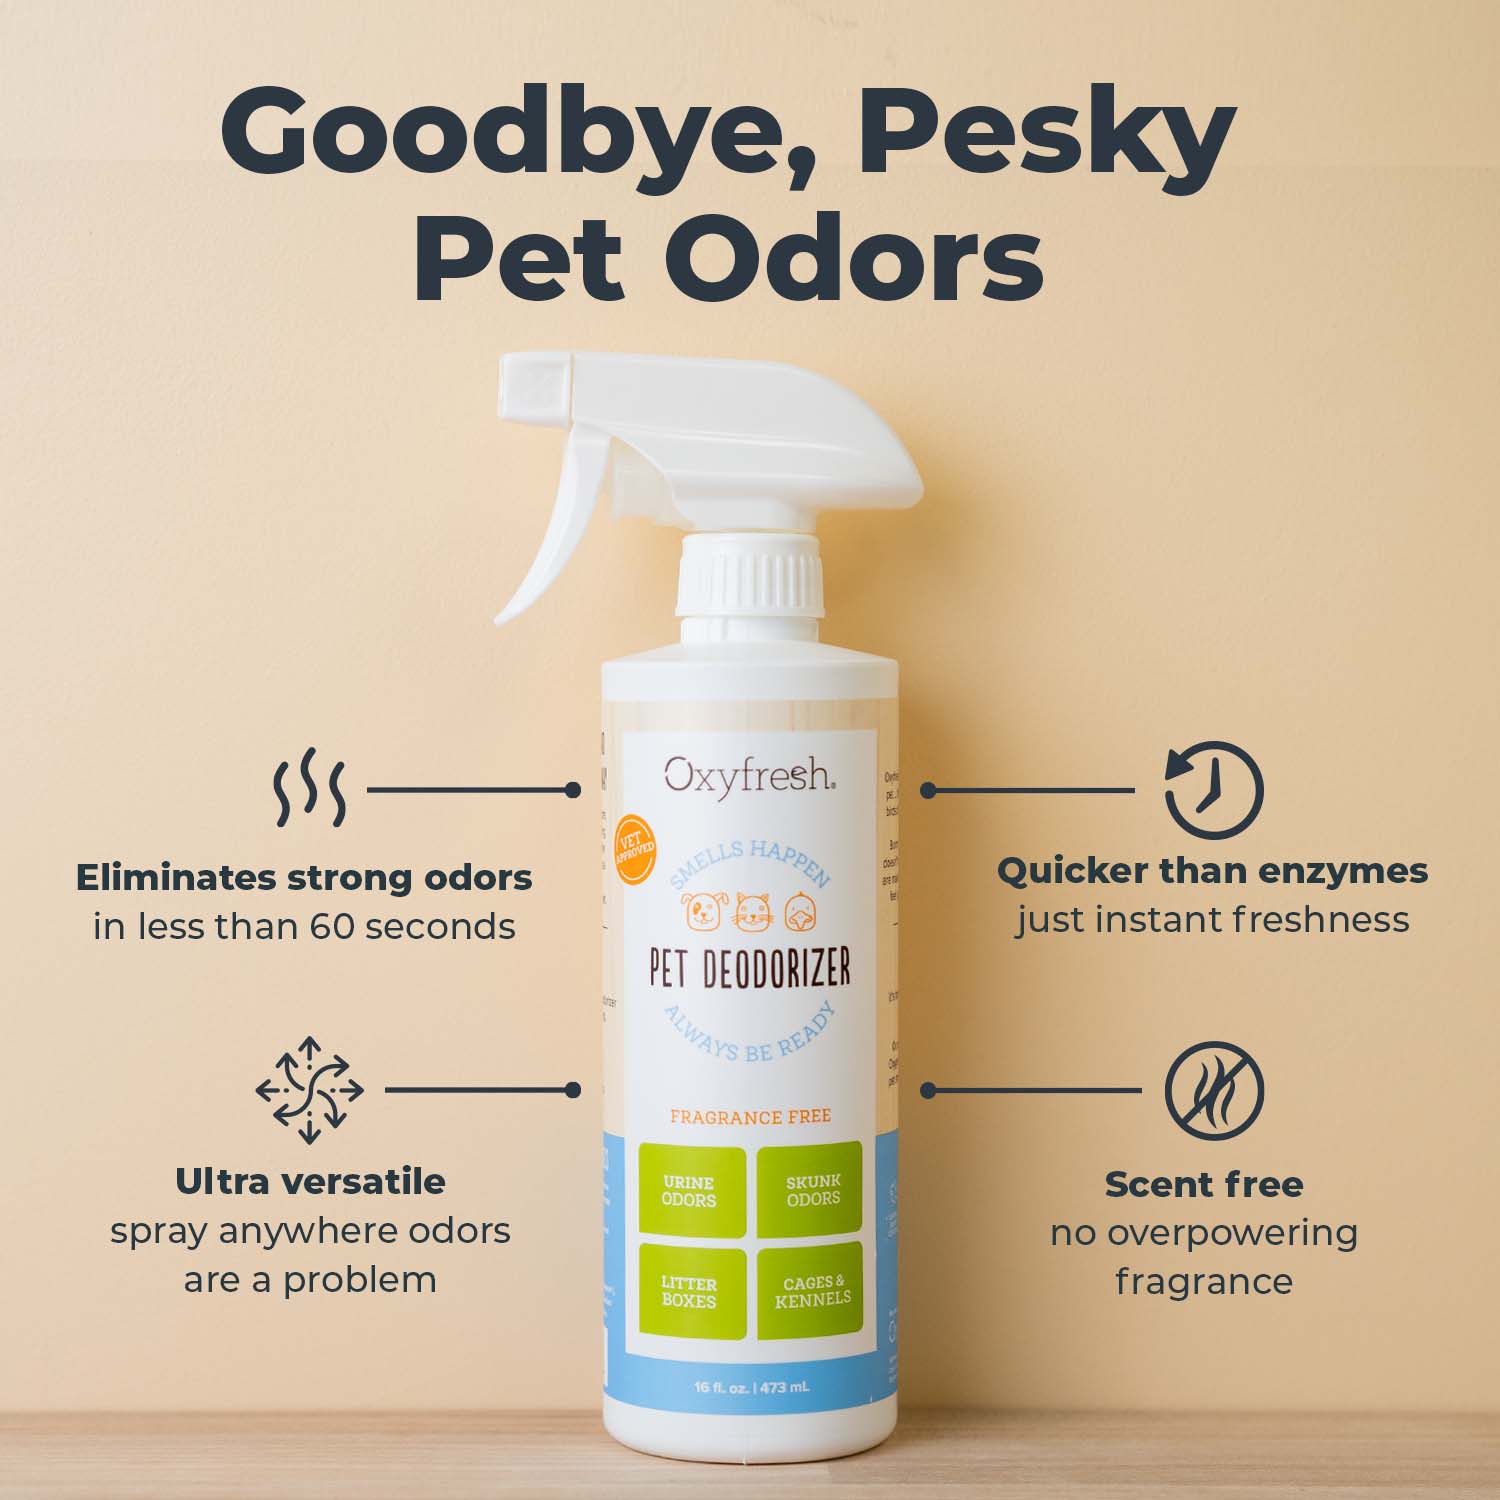 oxyfresh-advanced-pet-deodorizer-spray-eliminates-strong-odors-is-quicker-than-enzymes-ultra-versatile-and-scent-free